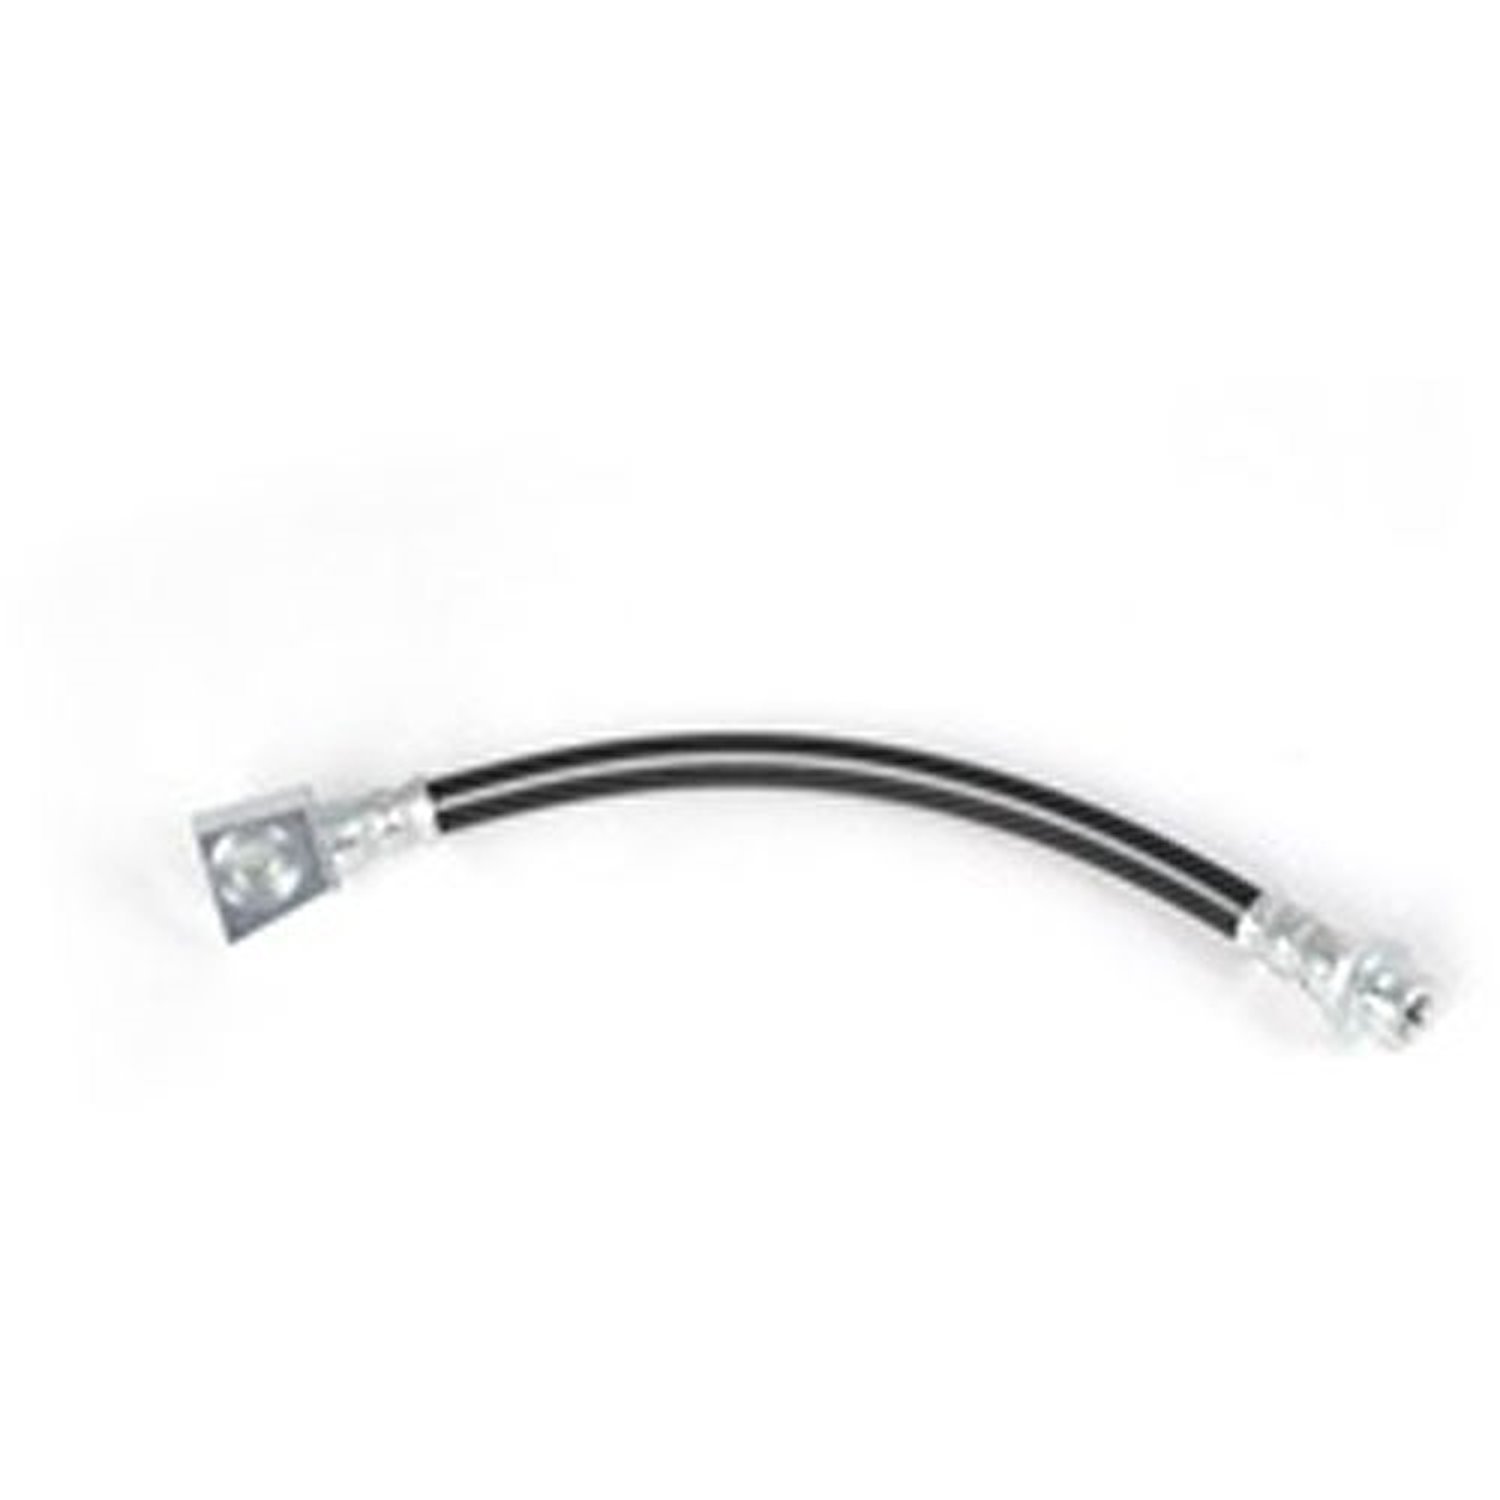 This left rear brake hose from Omix-ADA fits 03-06 Jeep Wranglers with disc brakes.